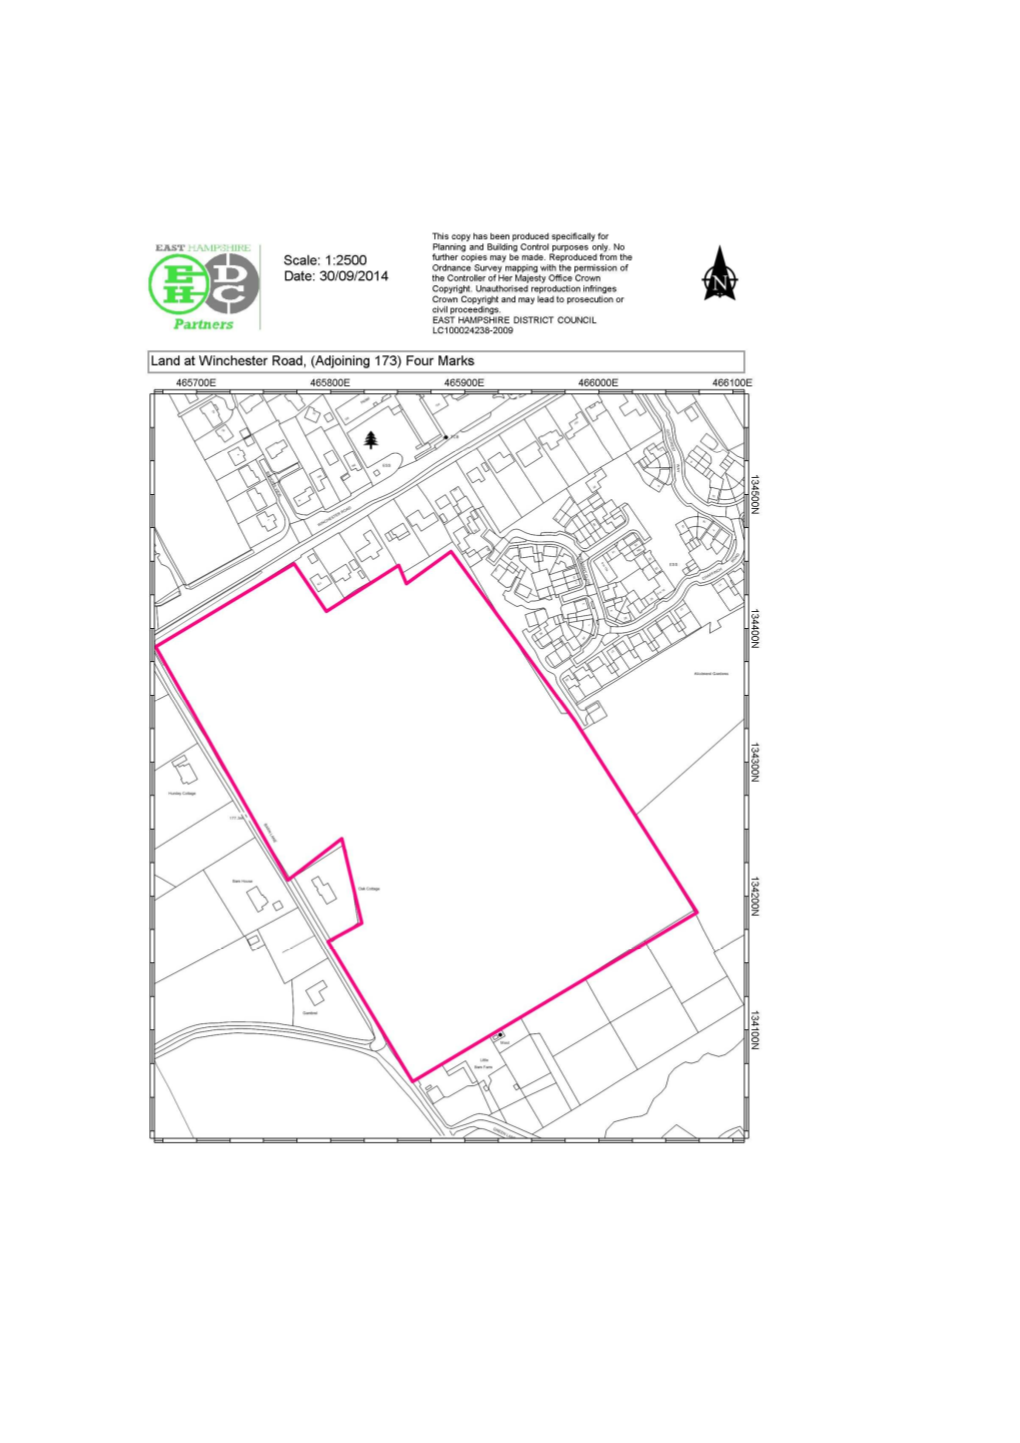 EHDC Part 1 Section 1 Item 1 Land at Winchester Road Four Marks.Pdf